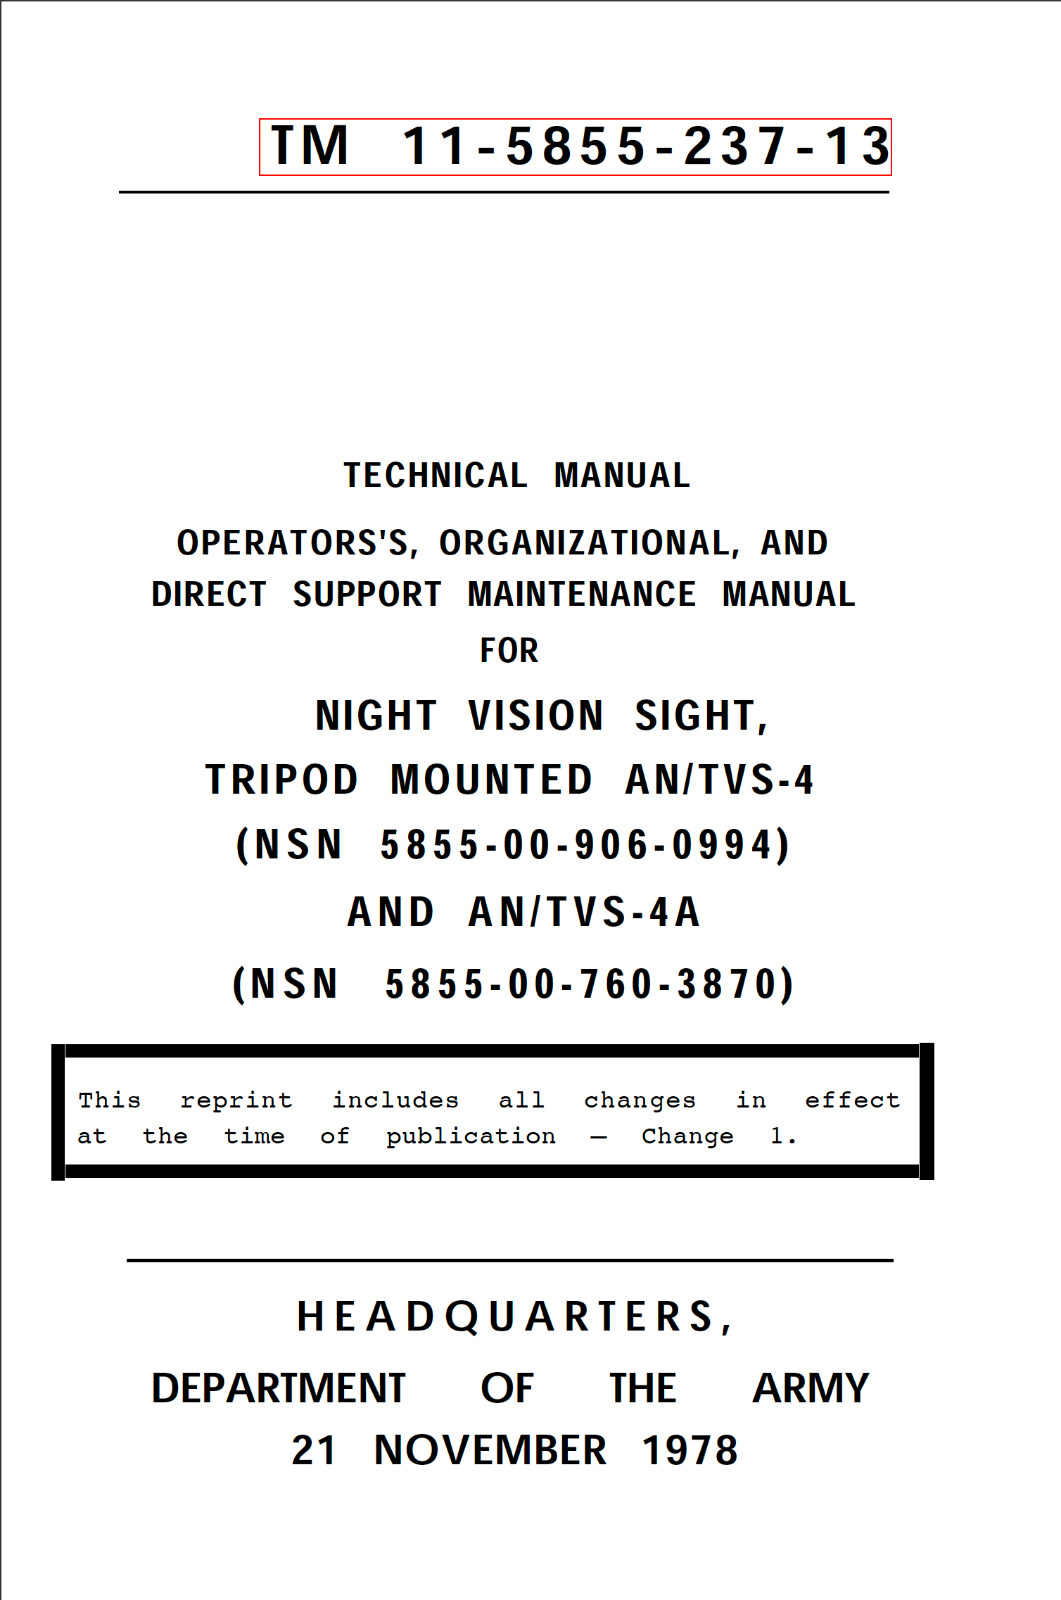 111 Page 1979 TM 11-5855-237-13 NIGHT VISION SIGHT AN/TVS-4 Manual on Data CD